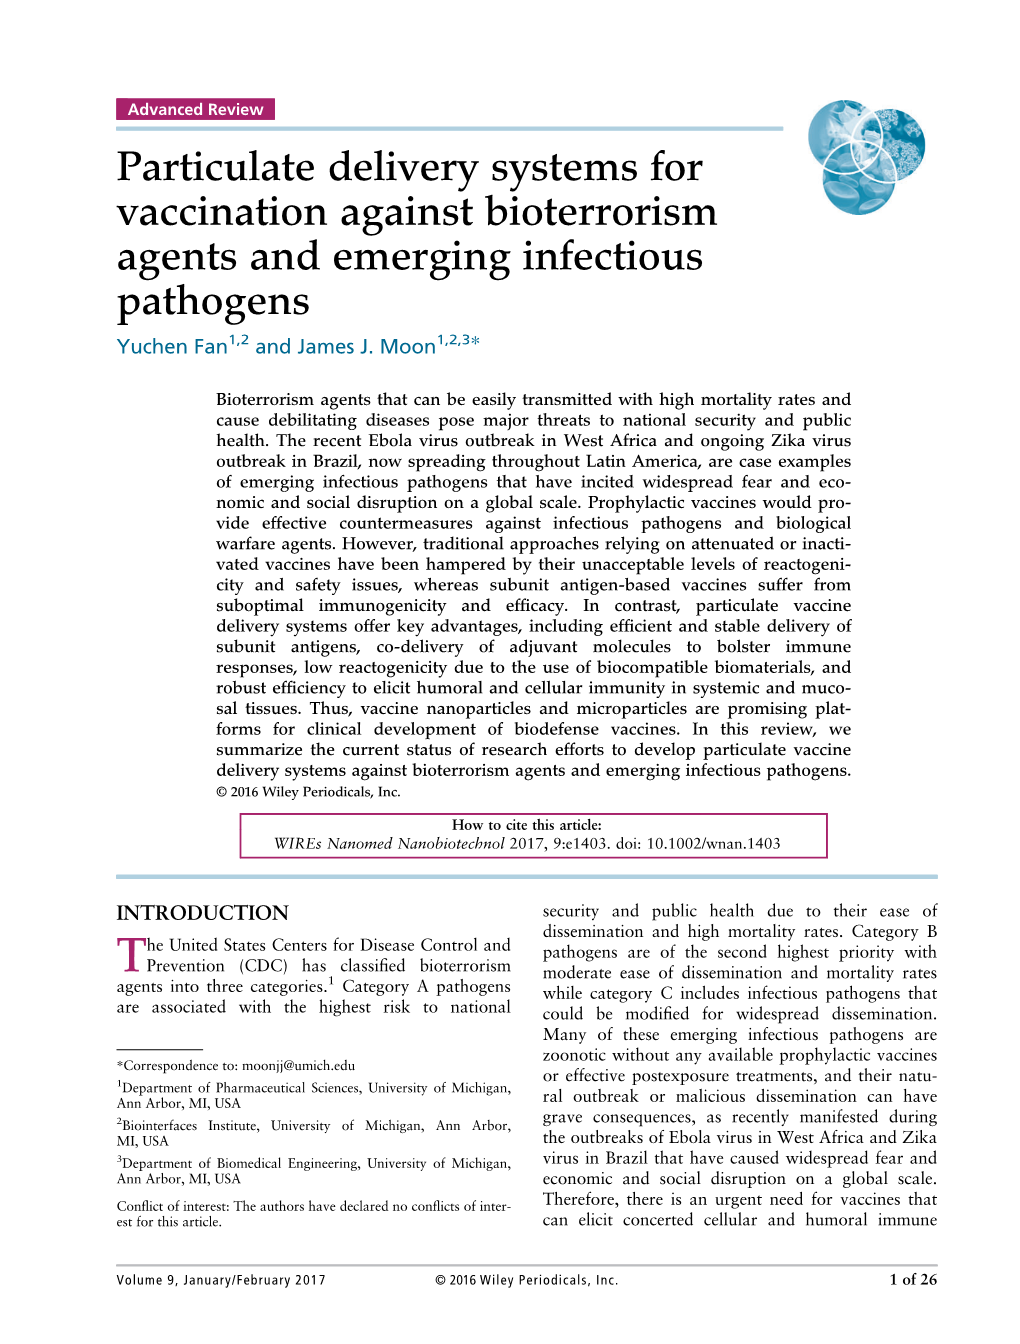 Particulate Delivery Systems for Vaccination Against Bioterrorism Agents and Emerging Infectious Pathogens Yuchen Fan1,2 and James J